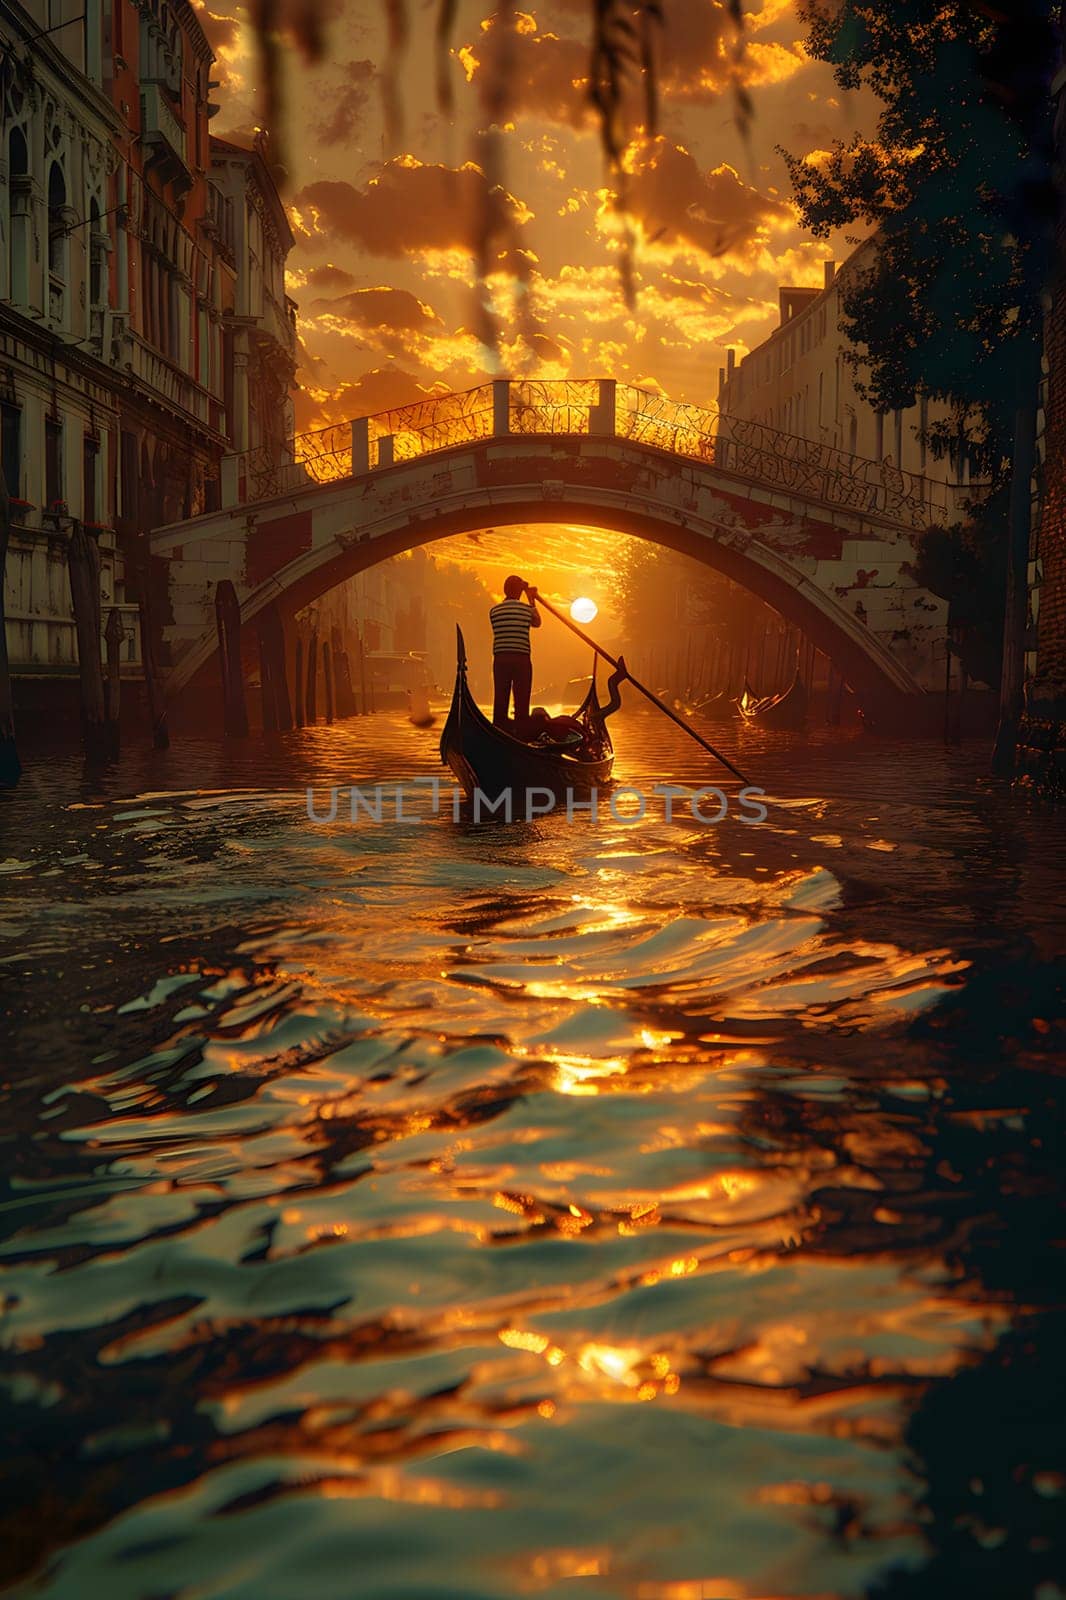 Man in boat at dusk on canal in gondola, with sunlight reflecting on water by Nadtochiy